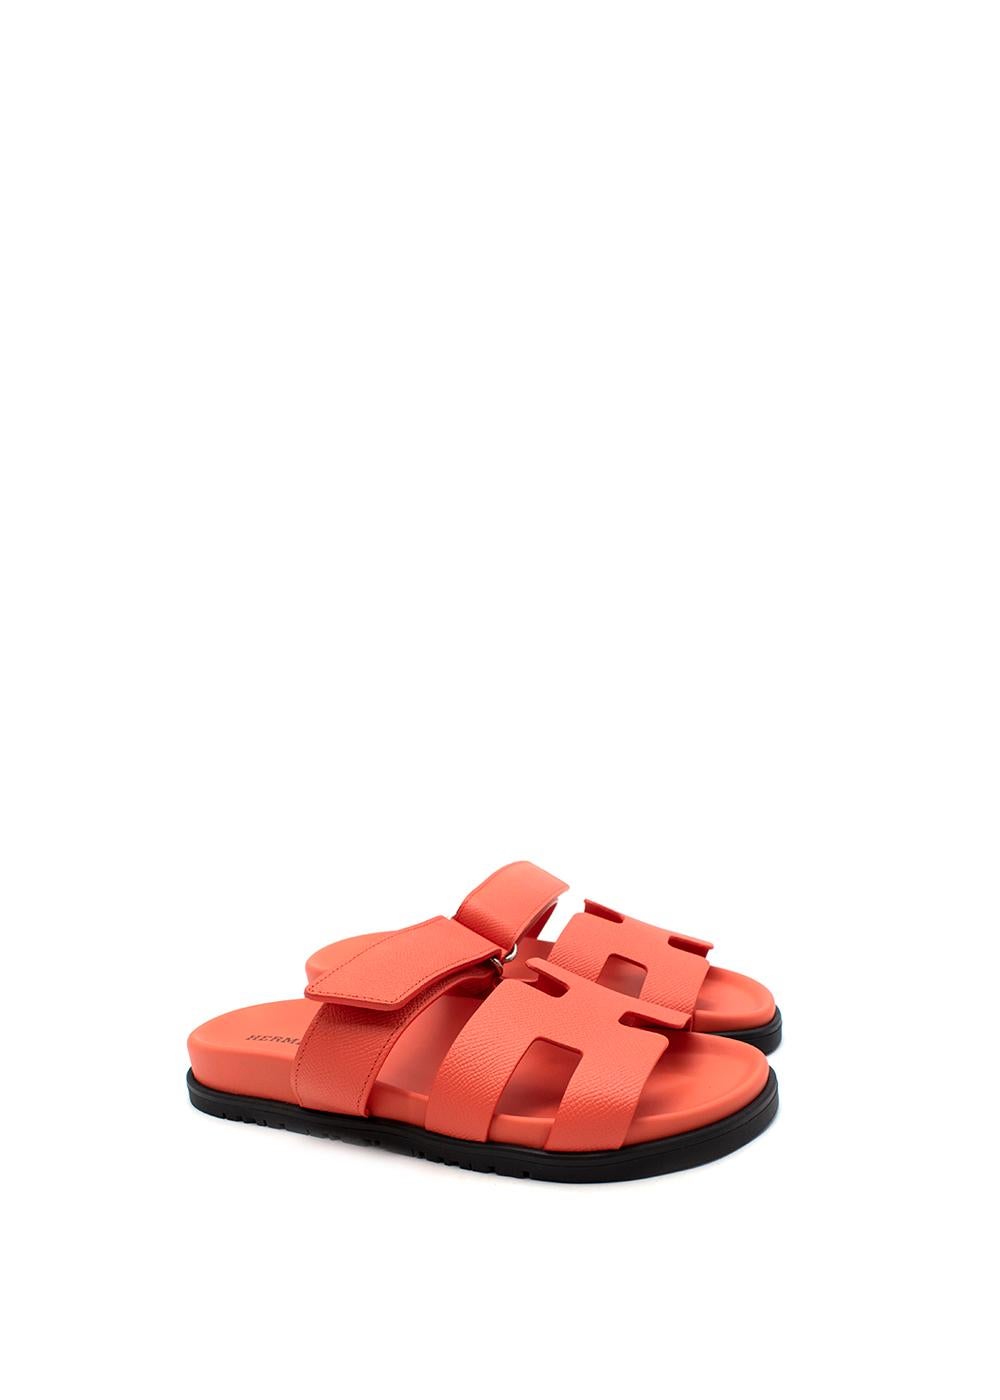 Hermes Coral Calfskin Chypre Sandal

-Calfskin leather
-Black rubber sole
-Natural calfskin insole
-Natural goatskin lining
-Unworn, excellent condition with original box and dustbag

